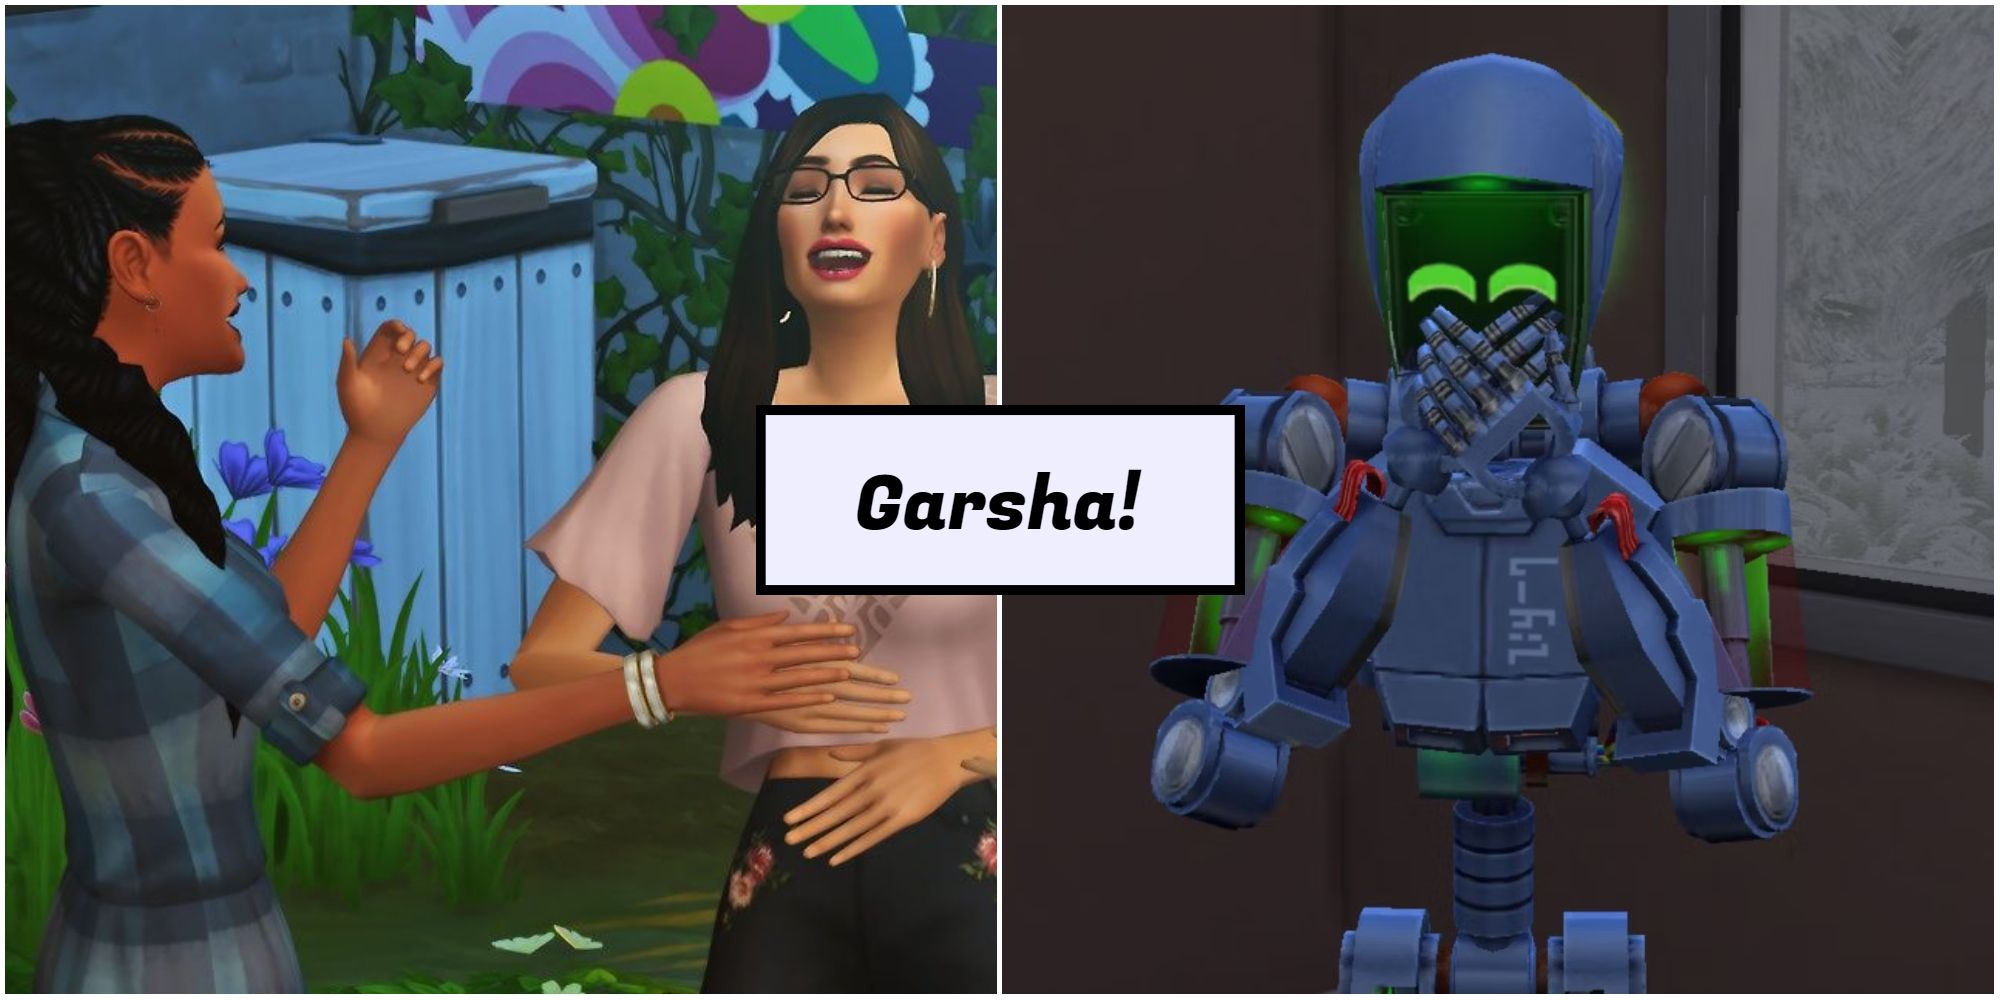 Garsha is the Simlish word for That's Funny!